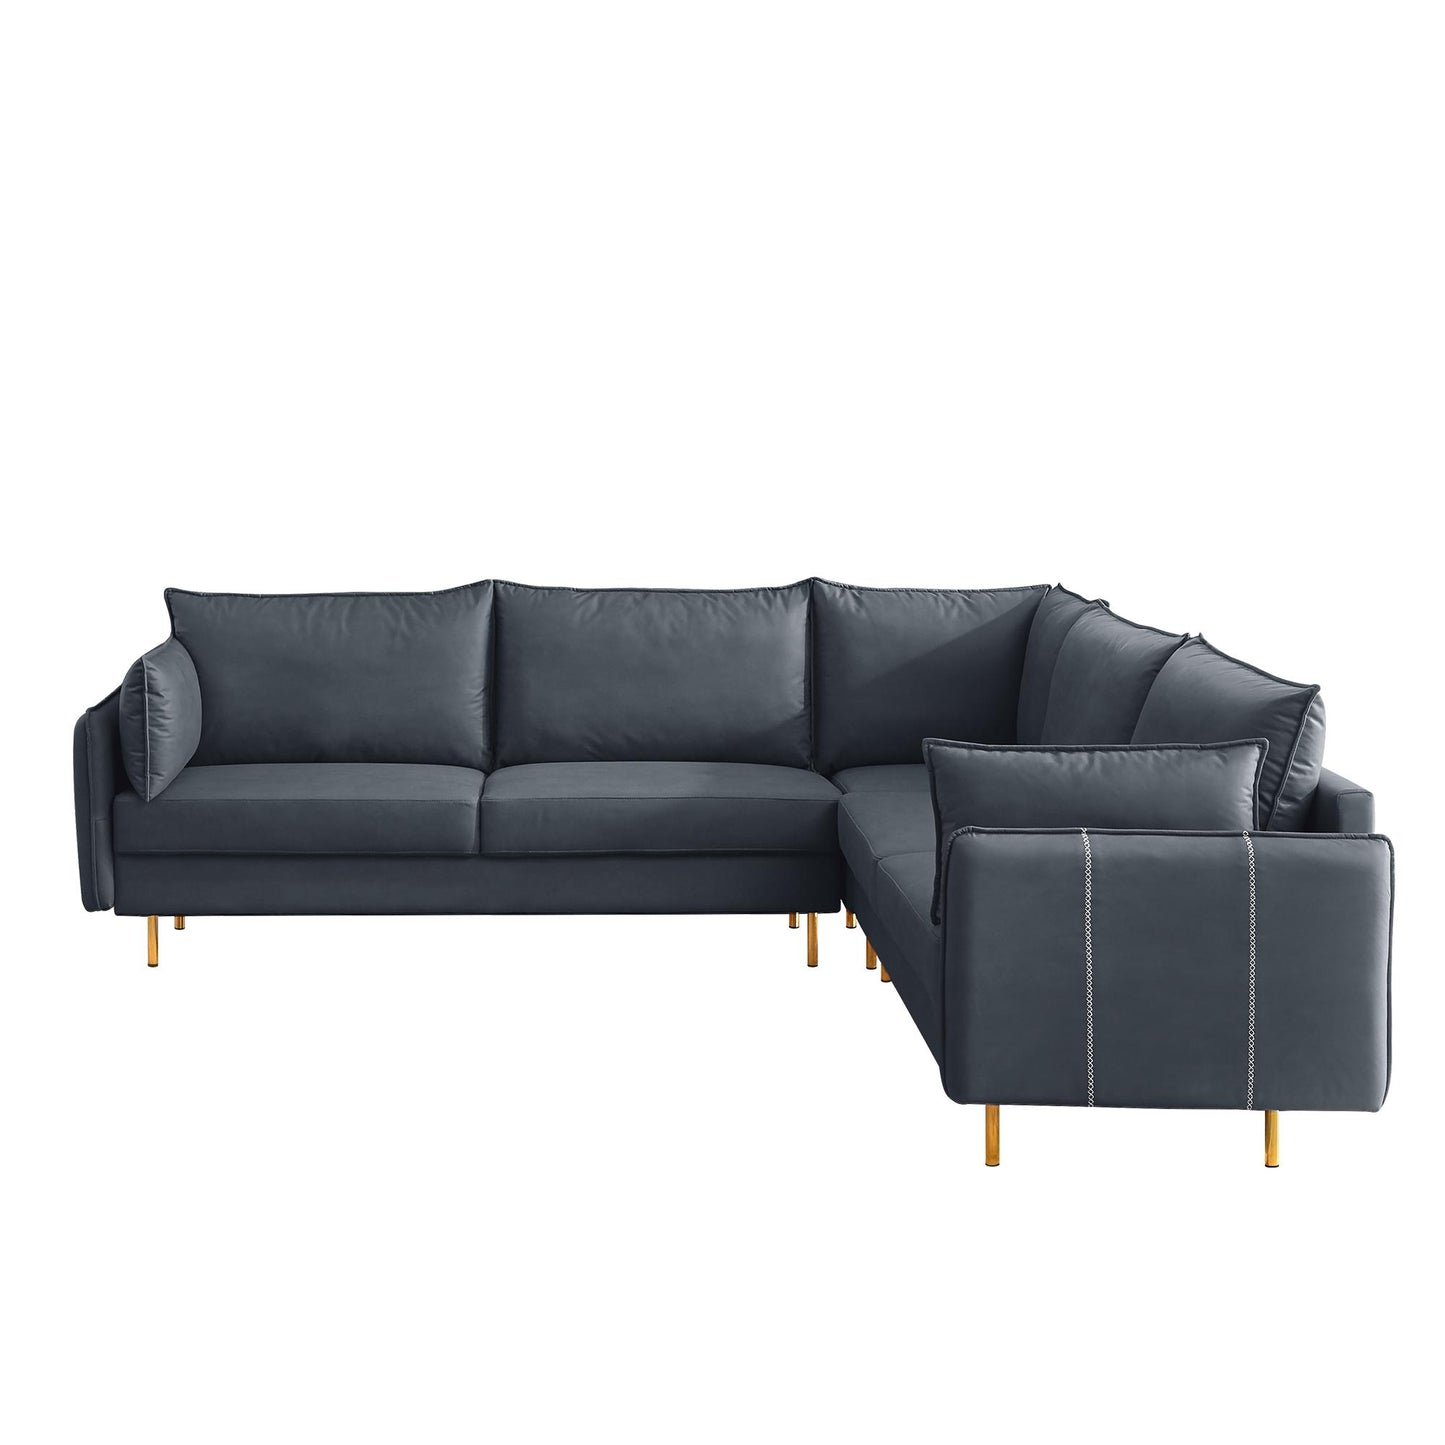 Dark Grey L-Shaped Technical Leather Sectional Sofa, 92.5x92.5"